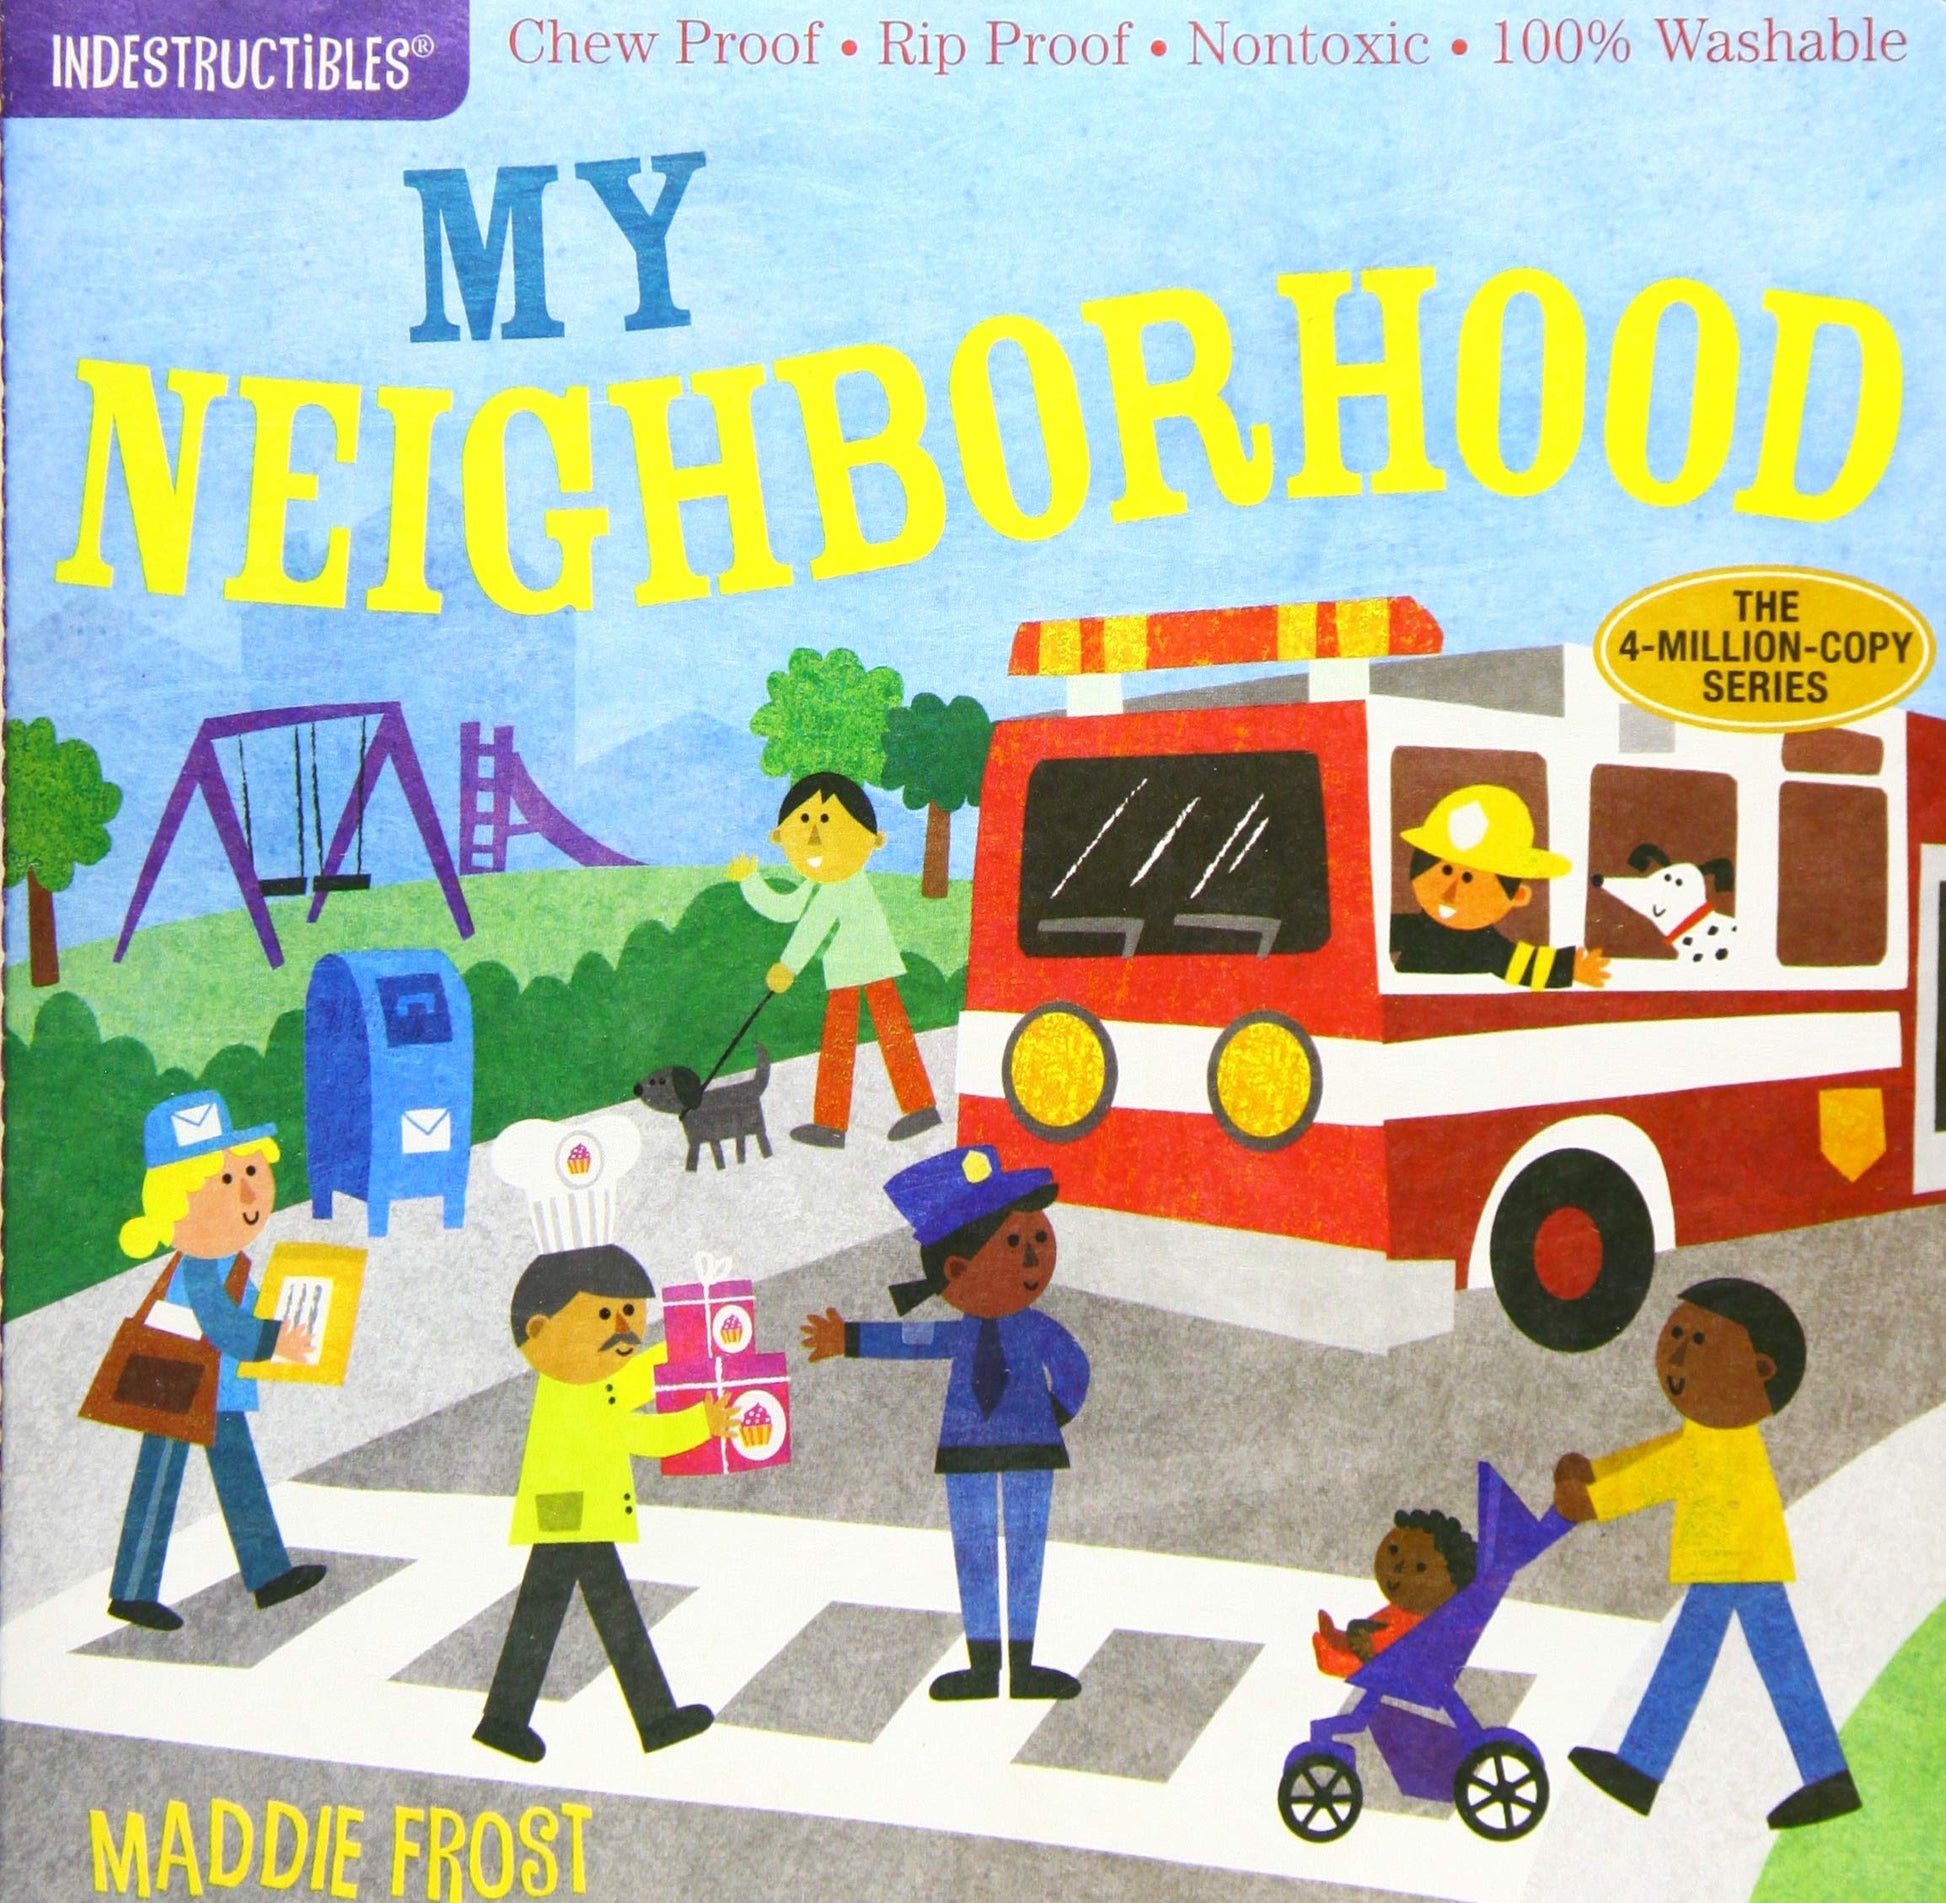 front cover of book has illustration of a busy road in a neighborhood with people walking at a crosswalk, a mail woman, and a firetruck, title, and author's name